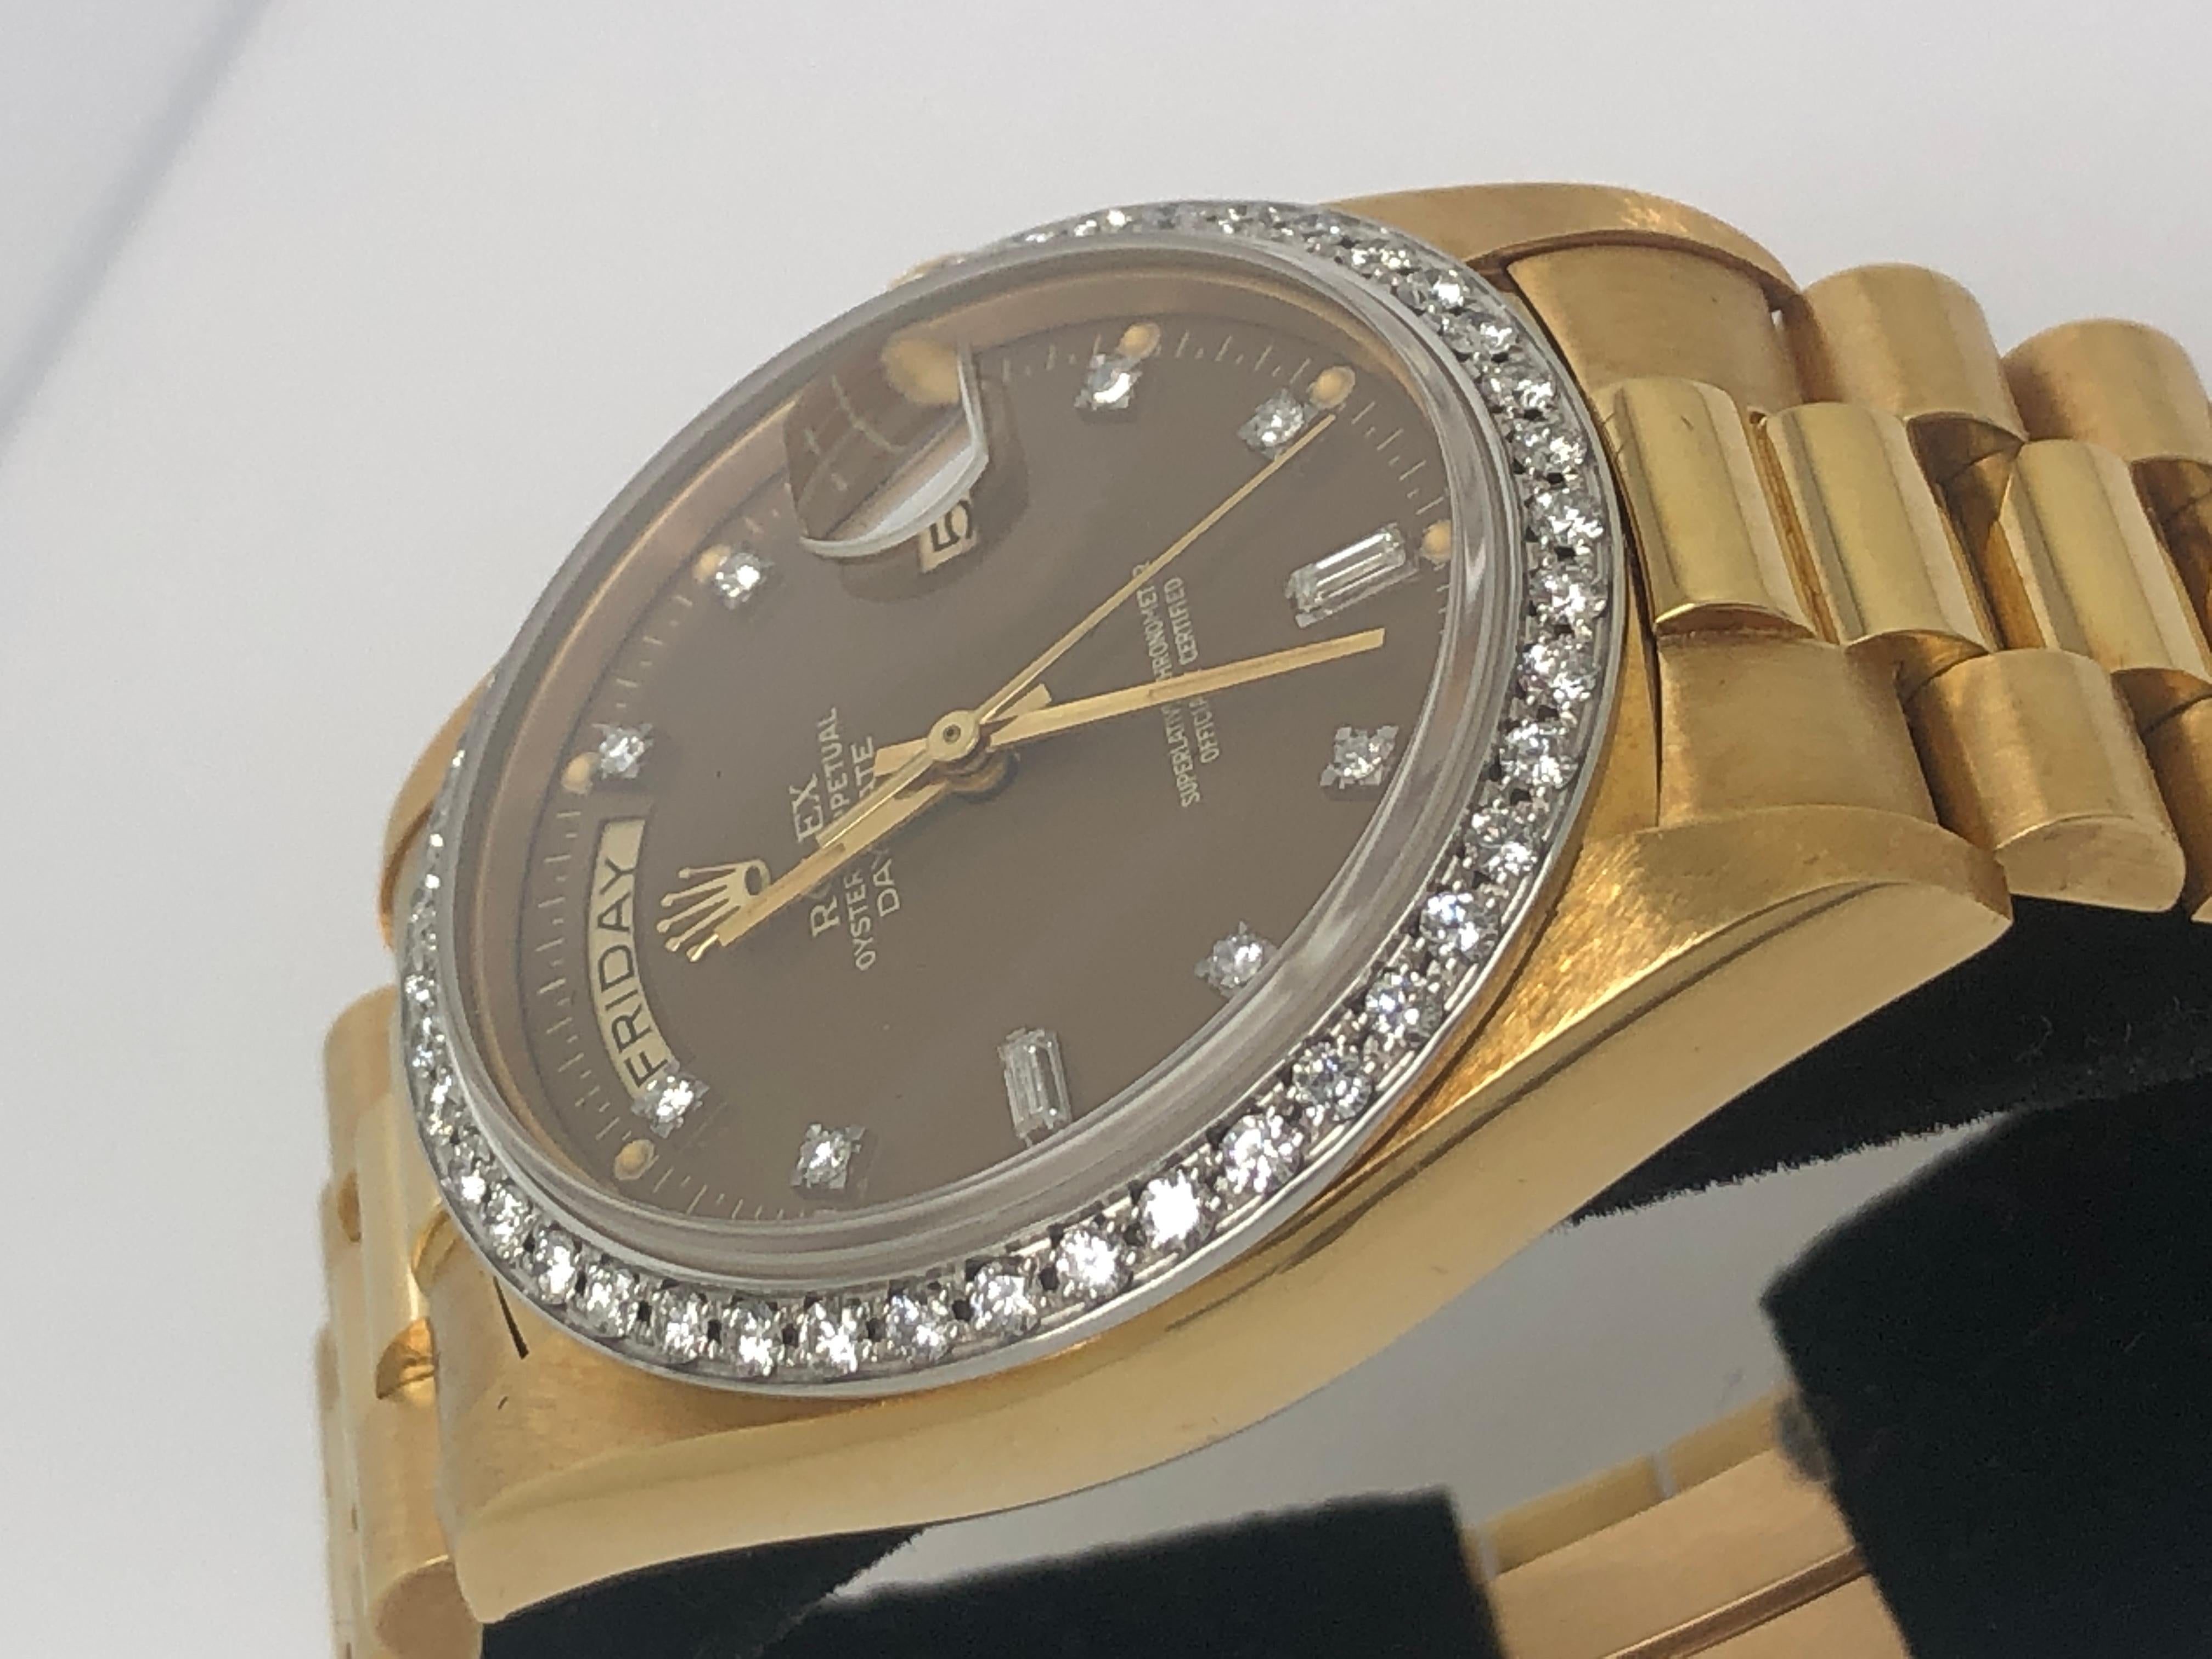 The Day Date is Rolex’s top of the line watch. Displaying the day of the week below 12 o’clock and the date at 3 o’clock, this model also became known as the President not only because its bracelet was named the President bracelet, but also because